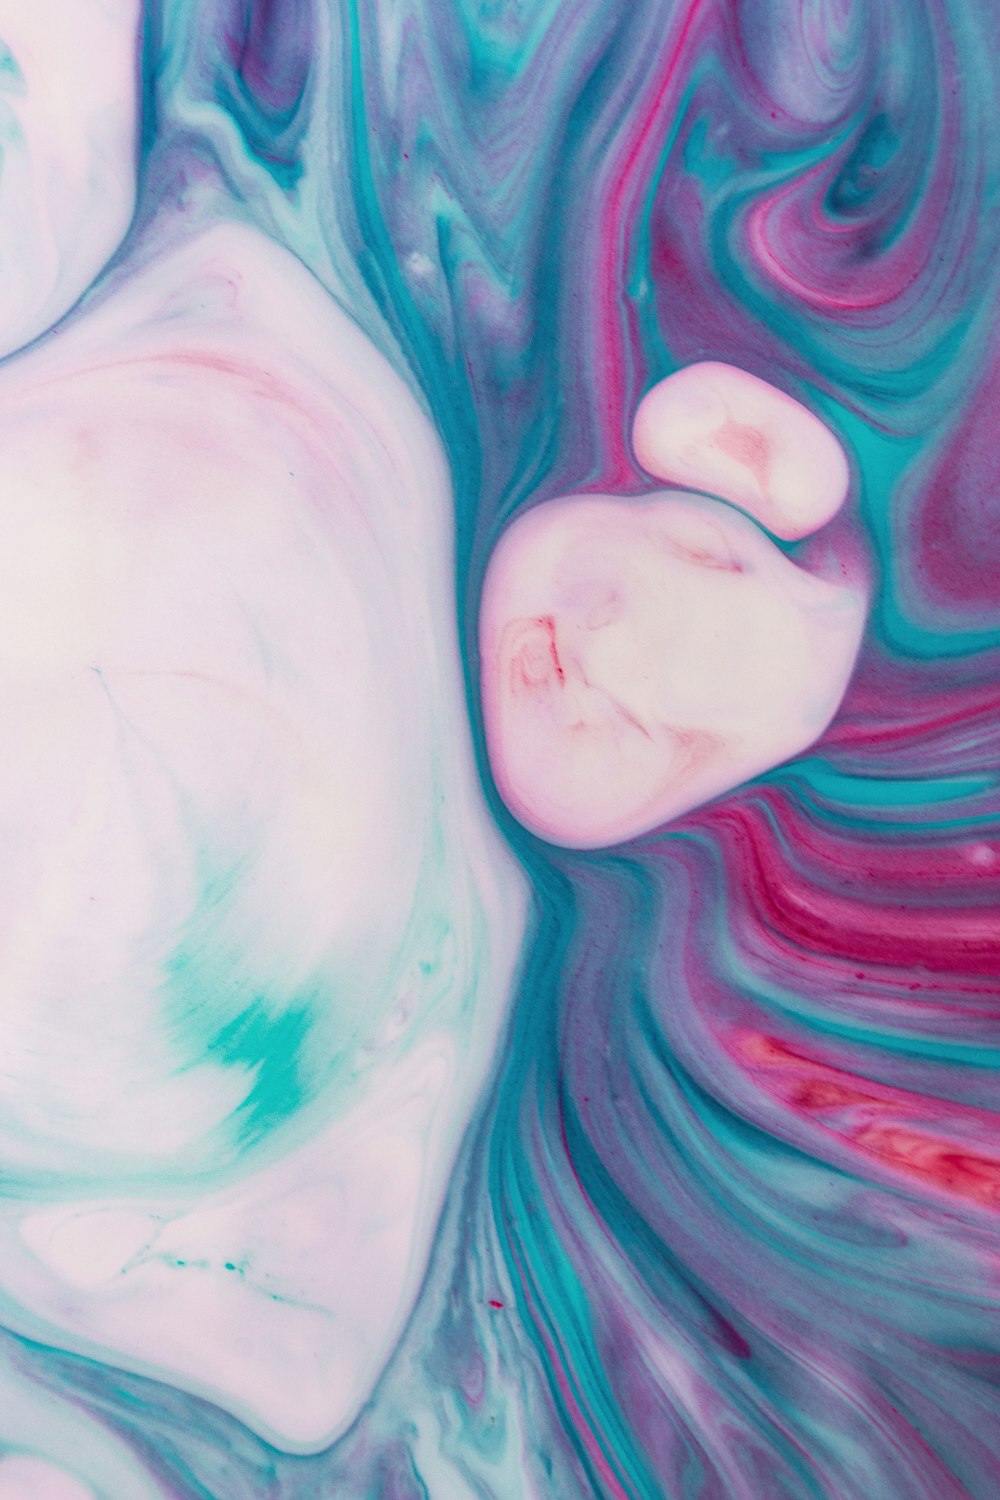 a close up of a pink and blue swirl